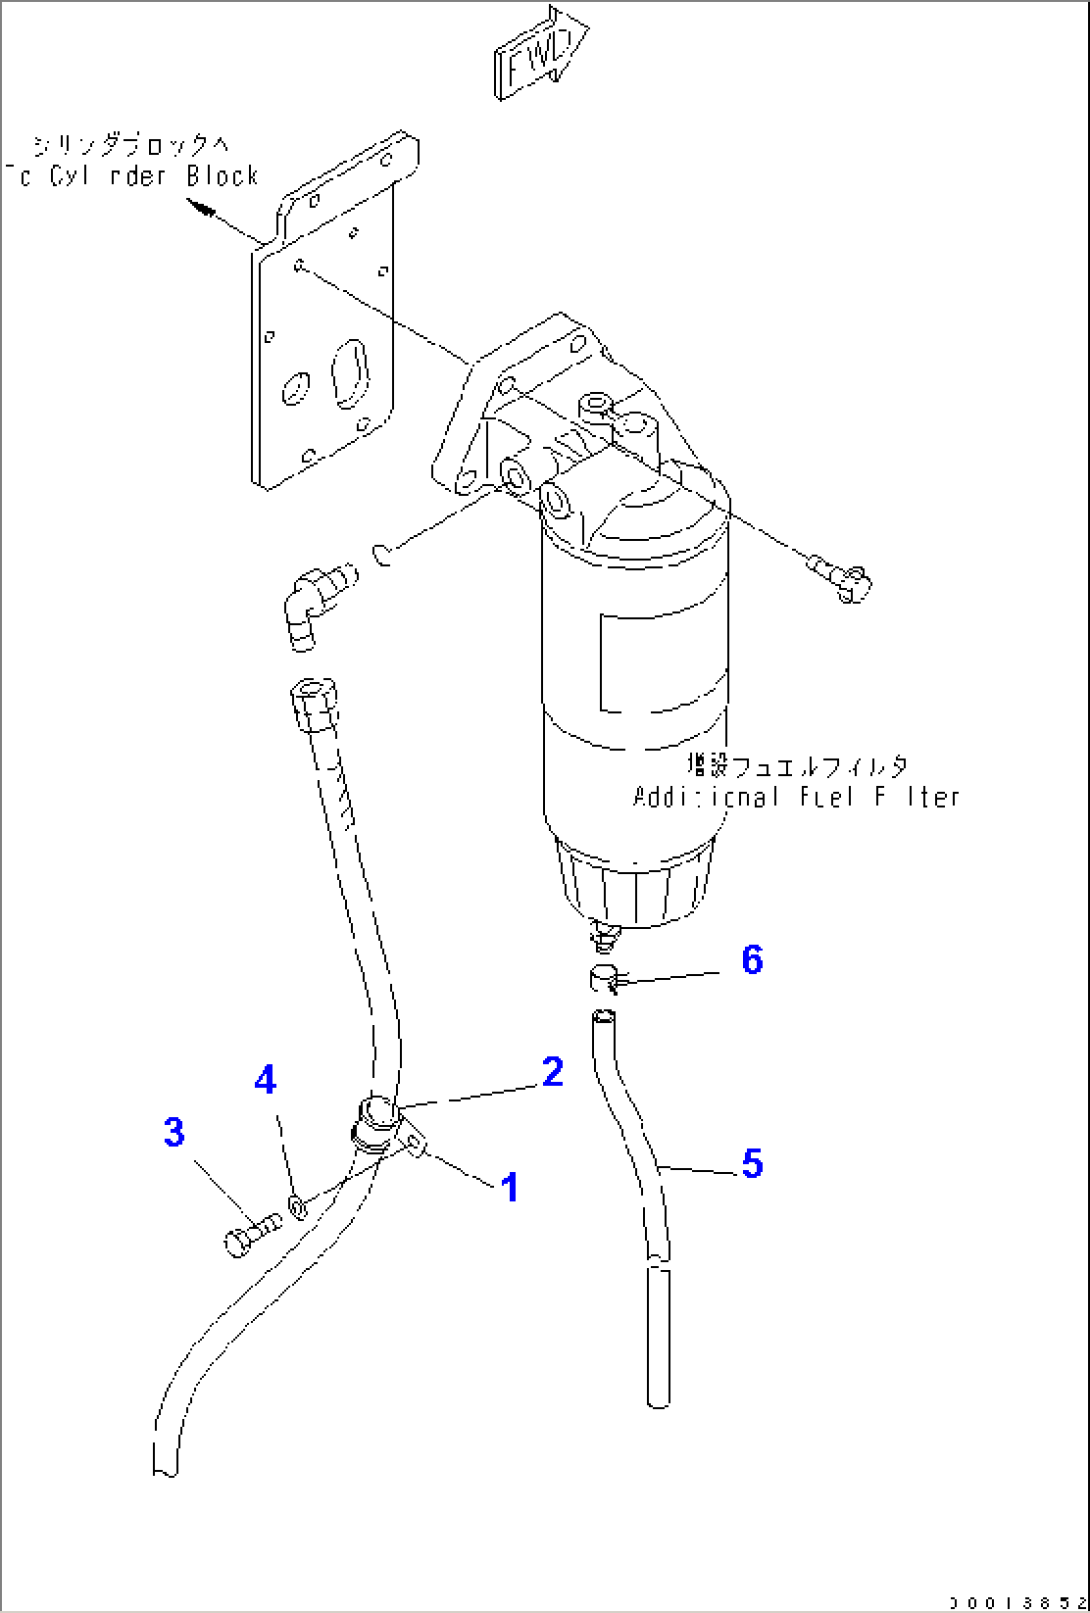 FUEL TANK (ADDITIONAL PIPING) (WITH WATER SEPARATOR) (EXCEPT JAPAN)(#52141-)